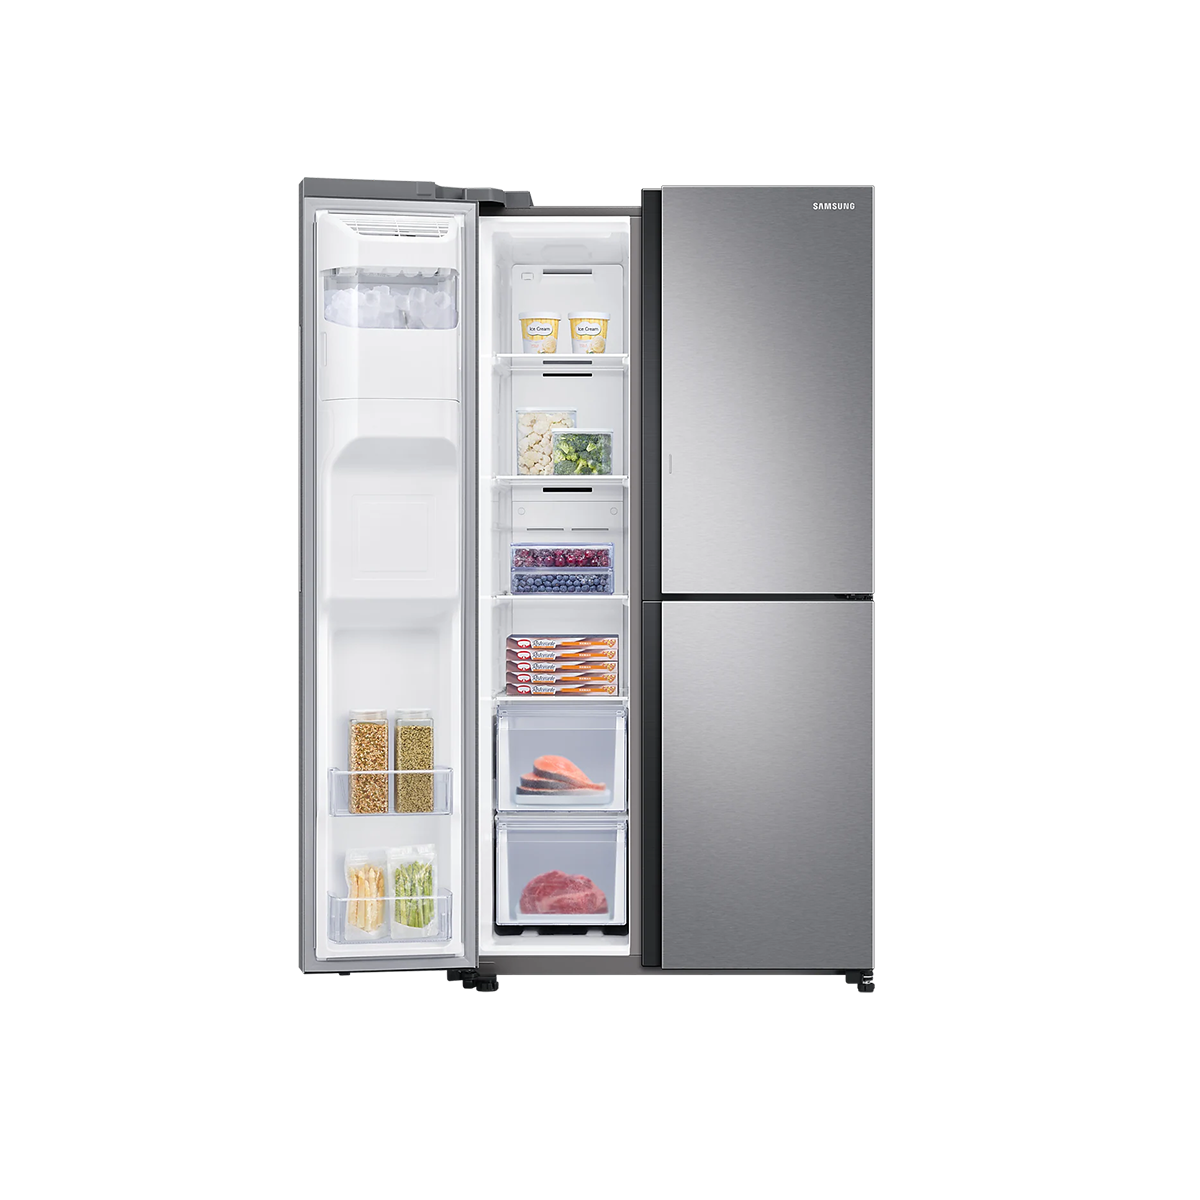 Samsung 849L Side-by-Side Refrigerator with Water Dispenser